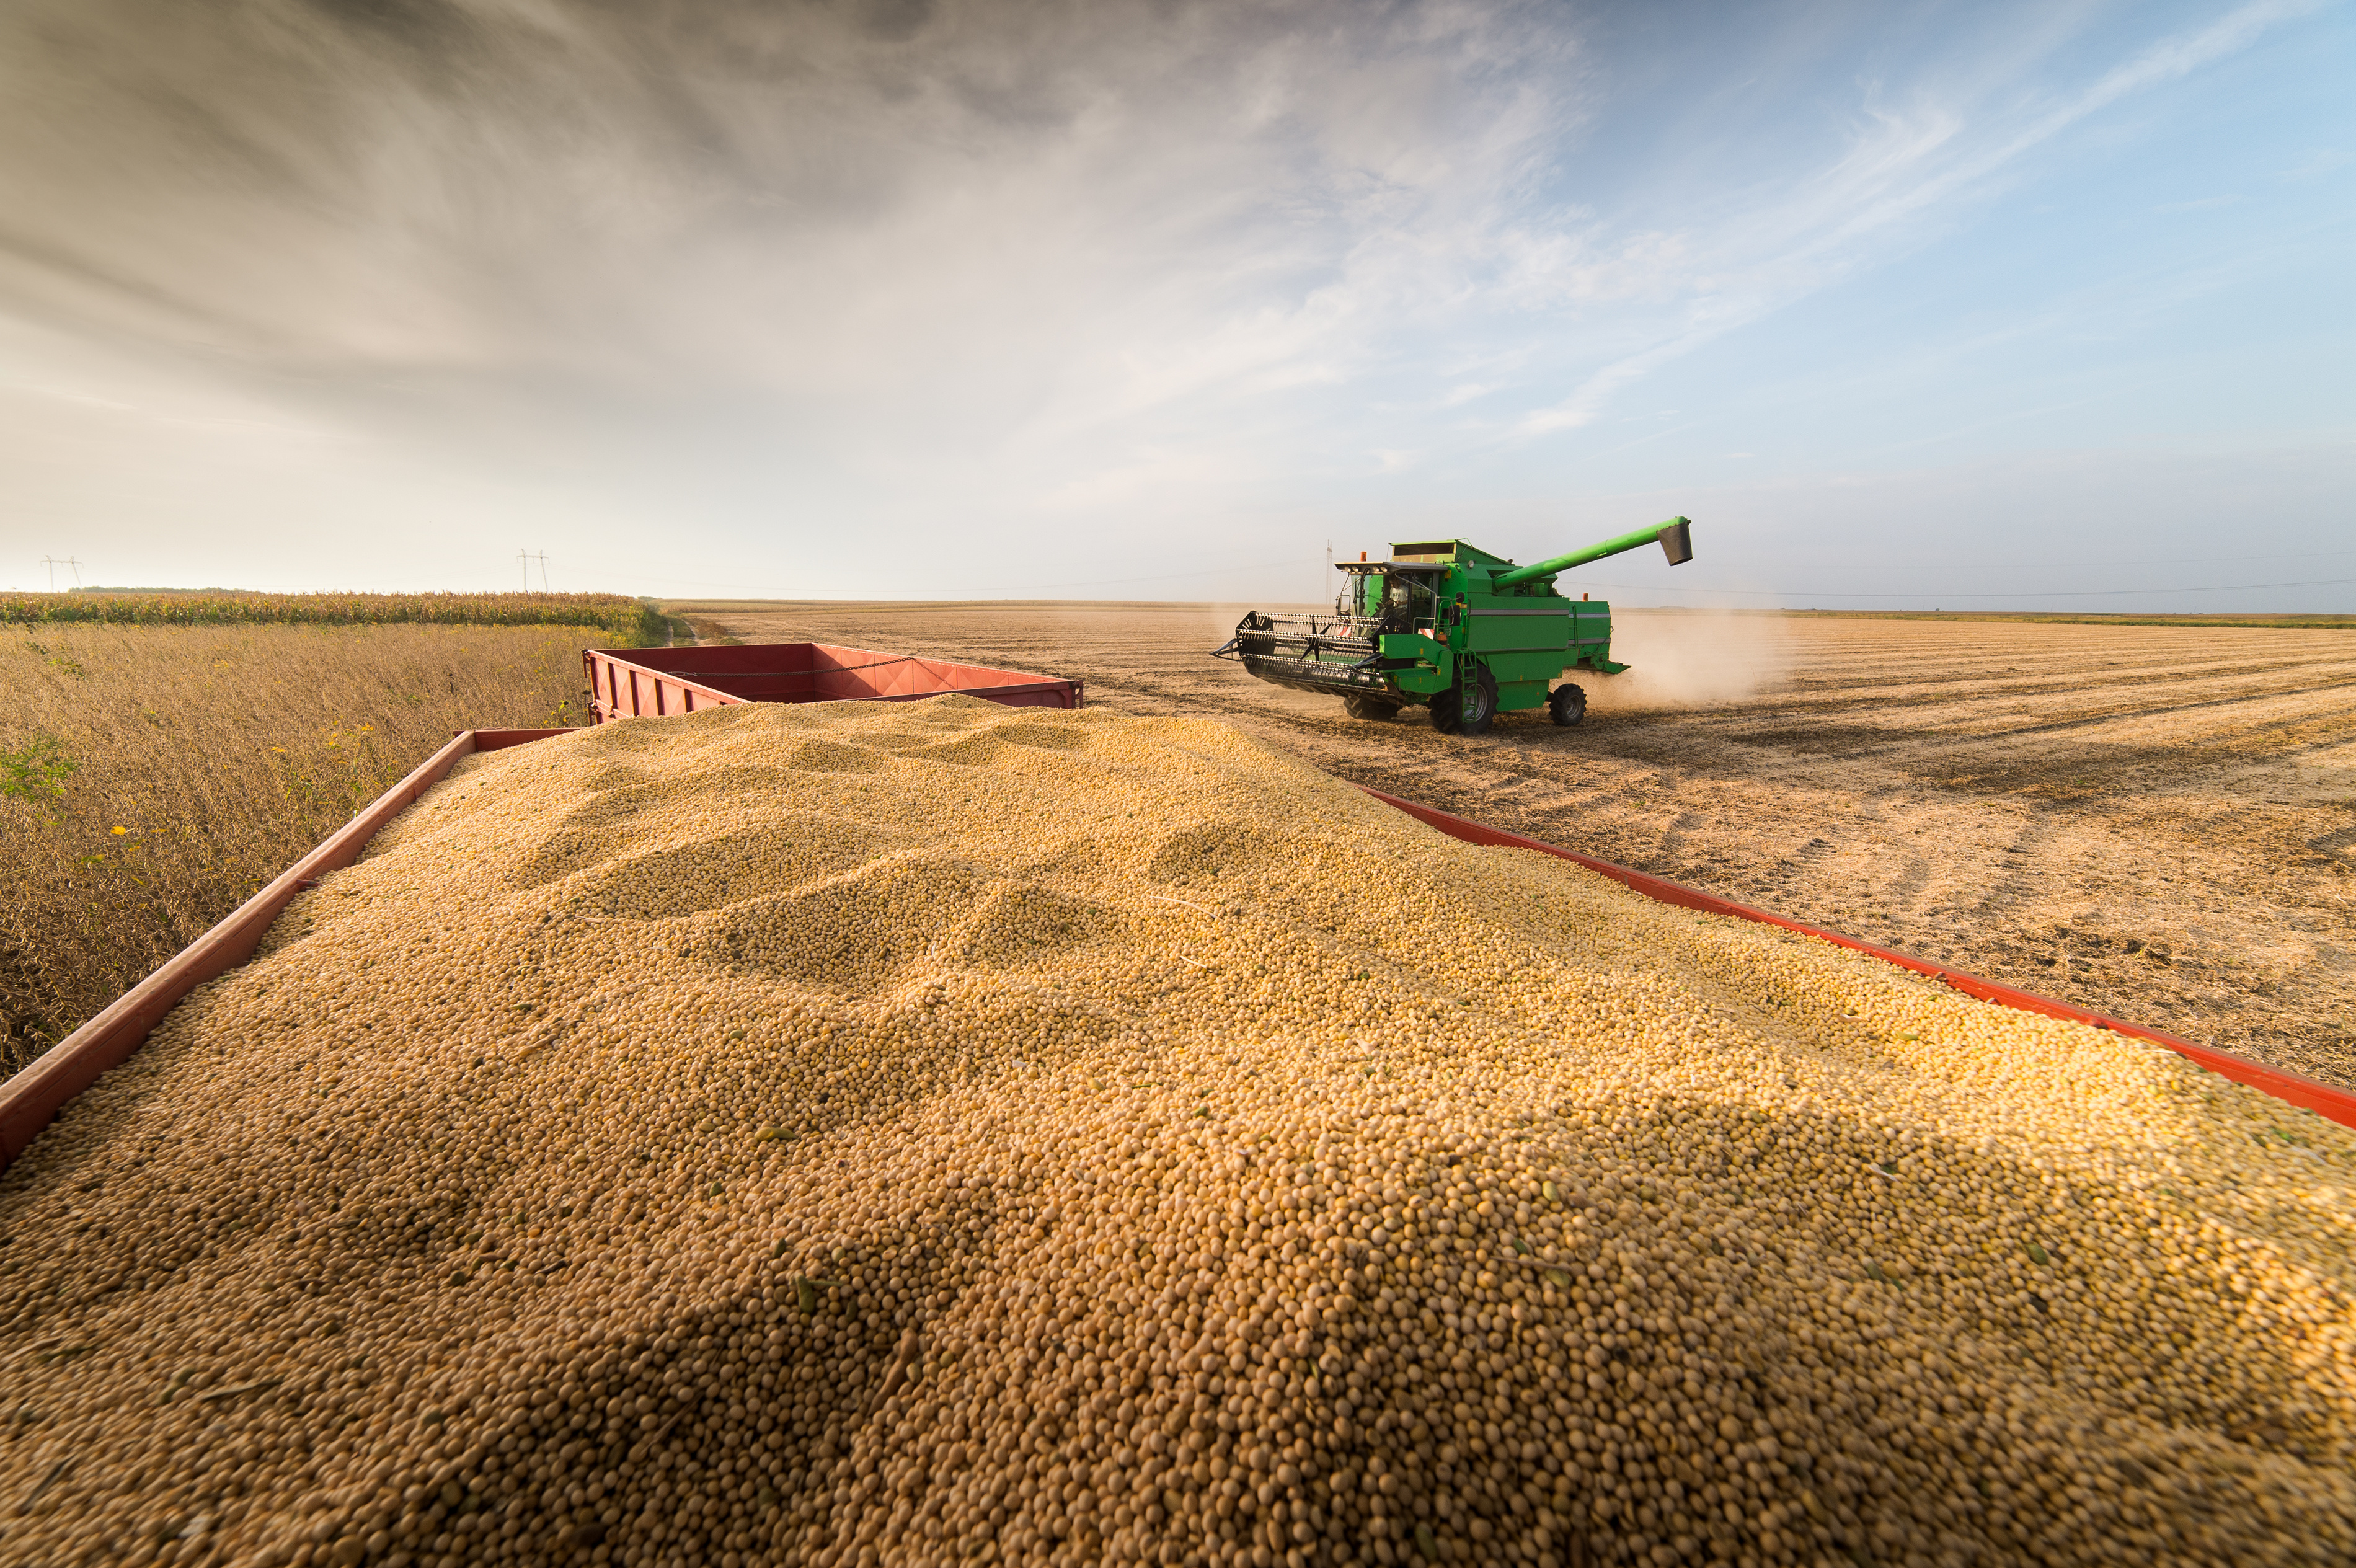 Green combine harvester in a field, collecting soybeans